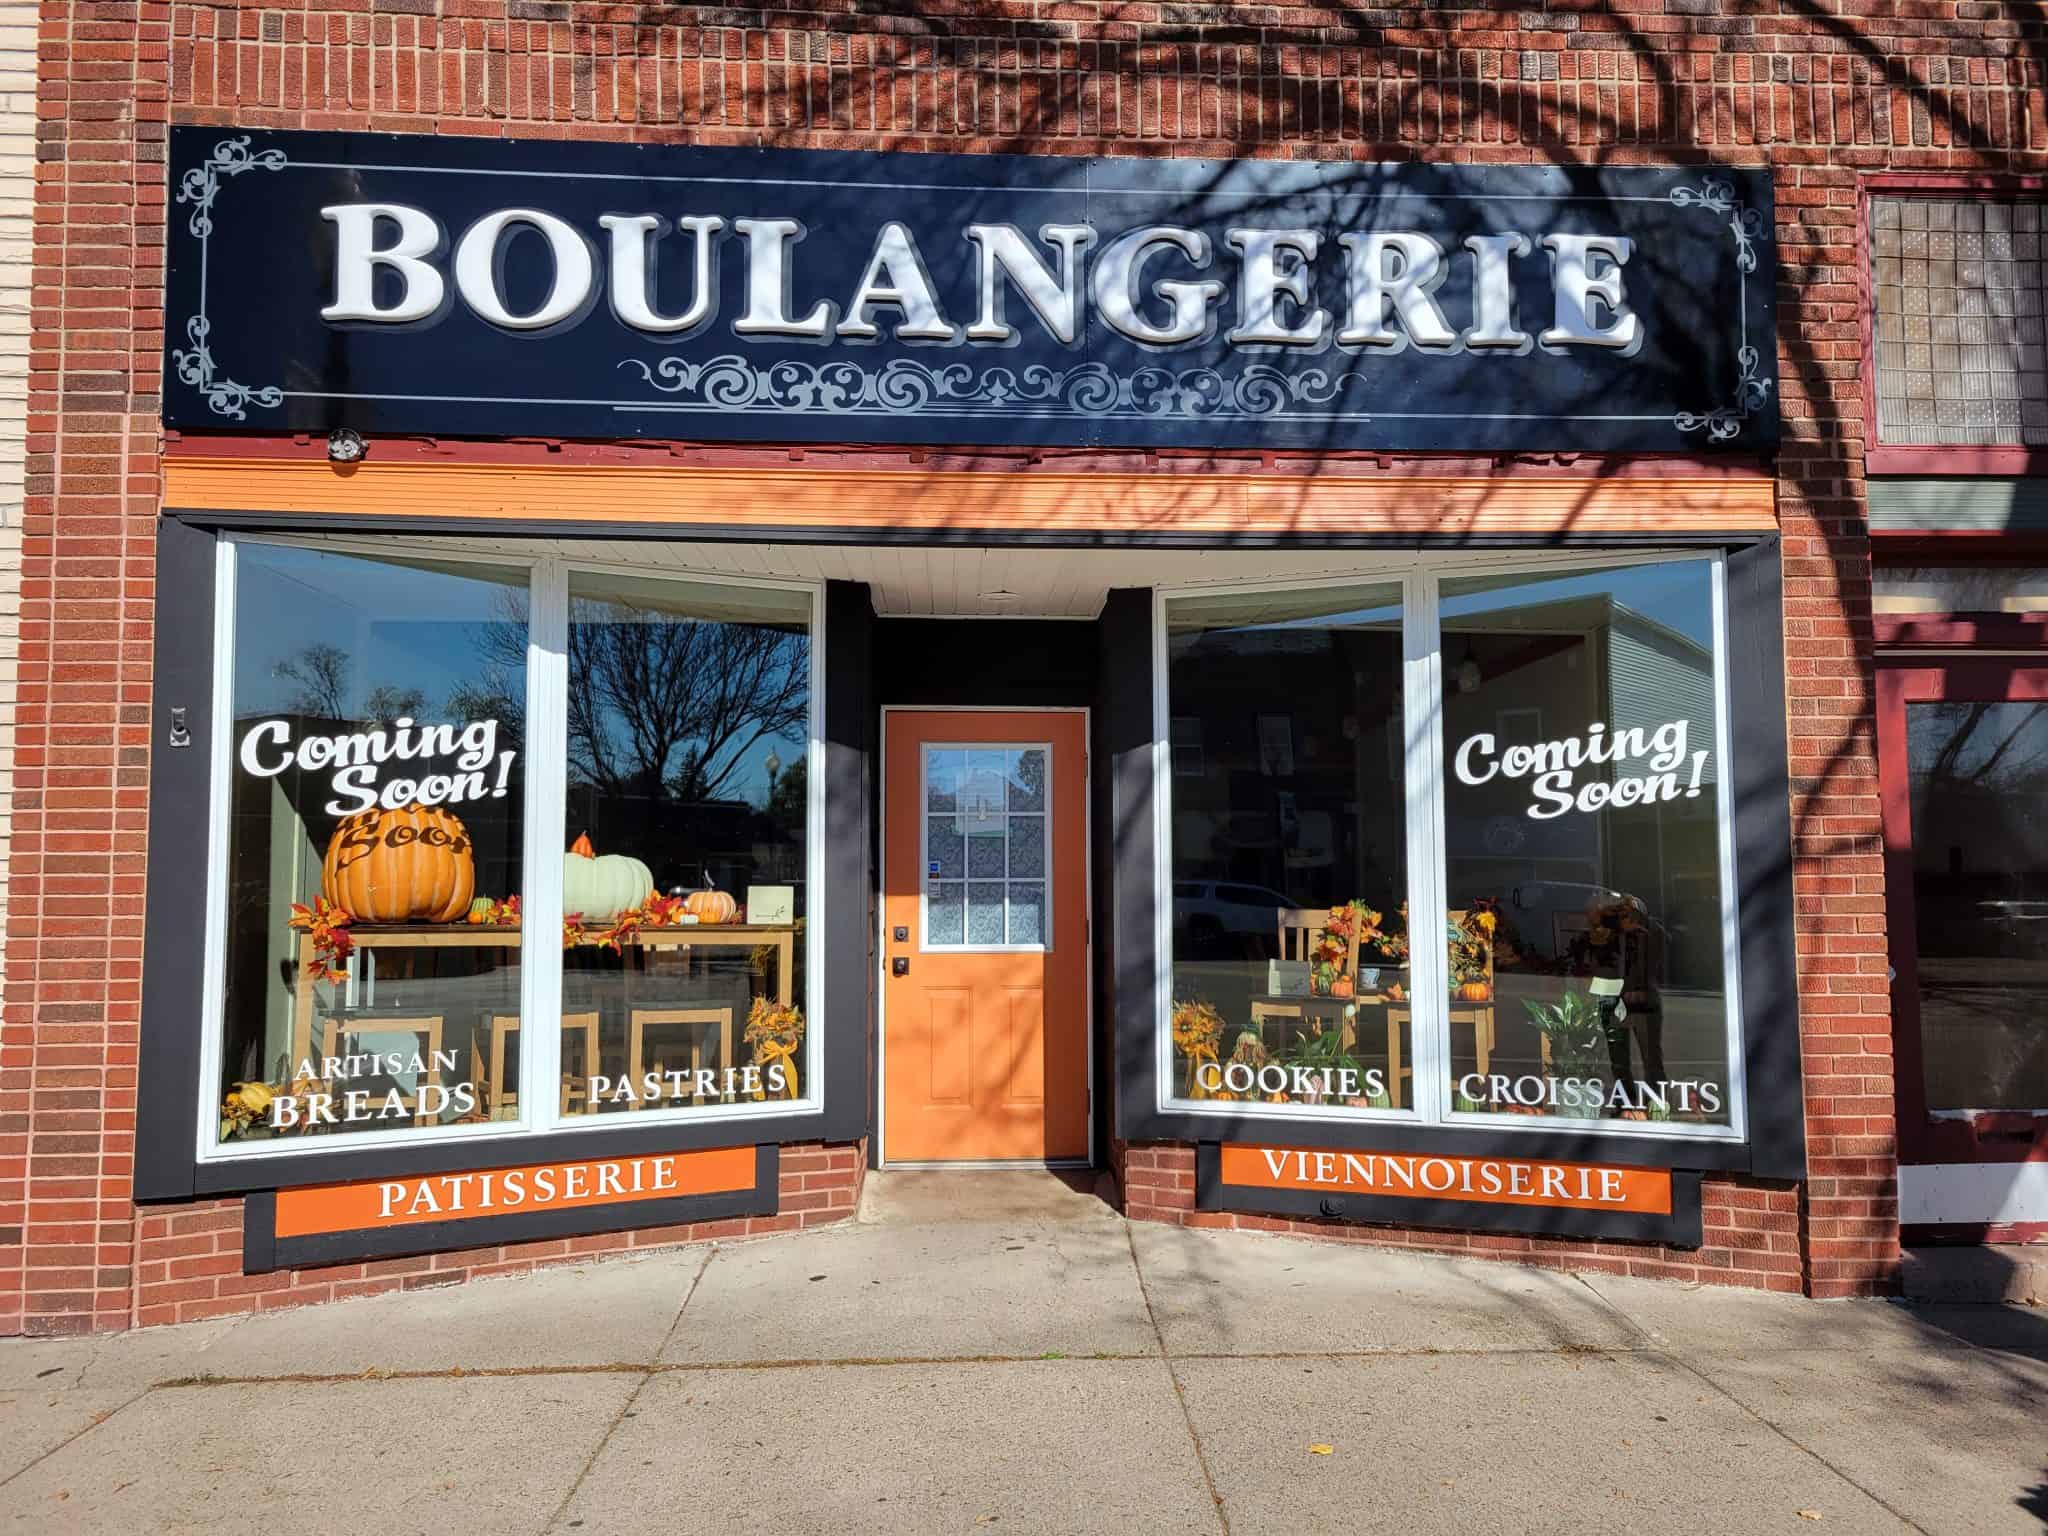 Traditional French bakery Boulangerie to host Grand Opening in downtown Tomahawk